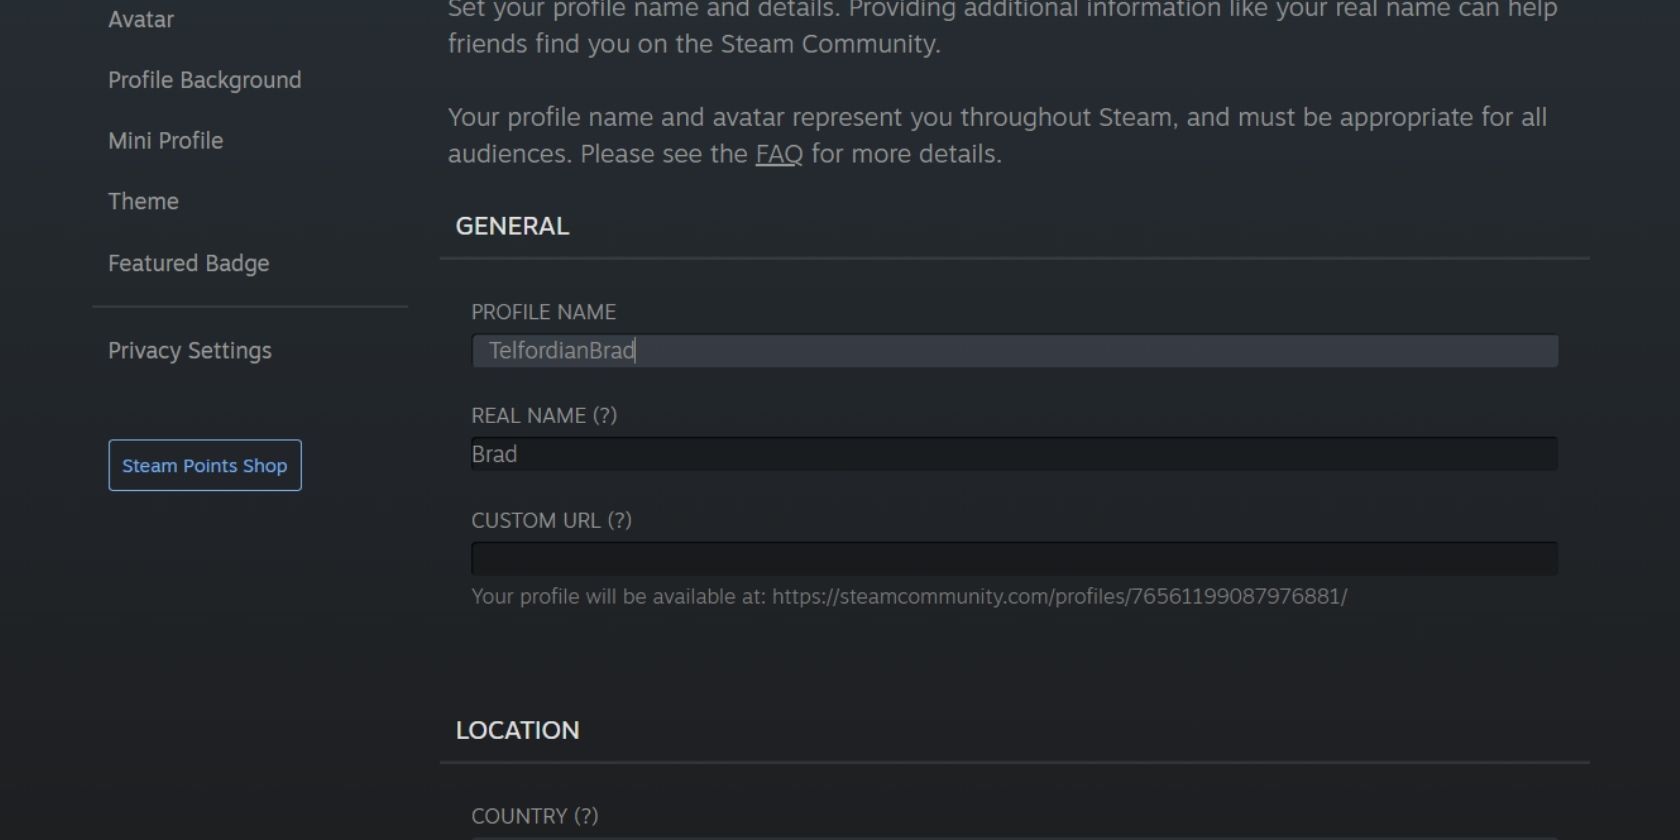 How to Change Your Steam Display Name